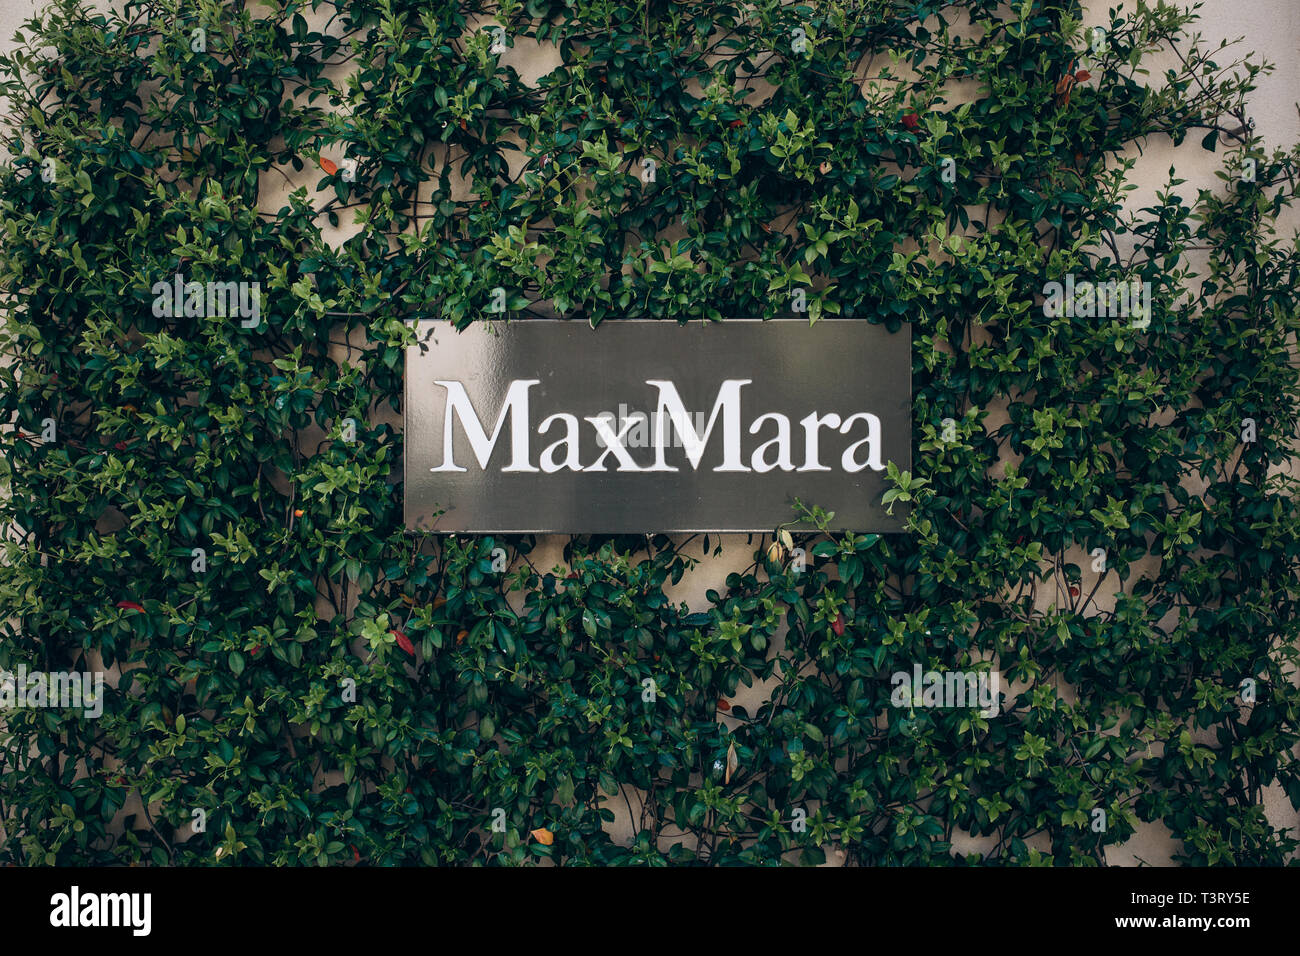 Montenegro, Tivat, April 9, 2019: Street sign at the entrance to the MaxMara shop. Italian brand and fashion store of clothes and perfumery. Stock Photo